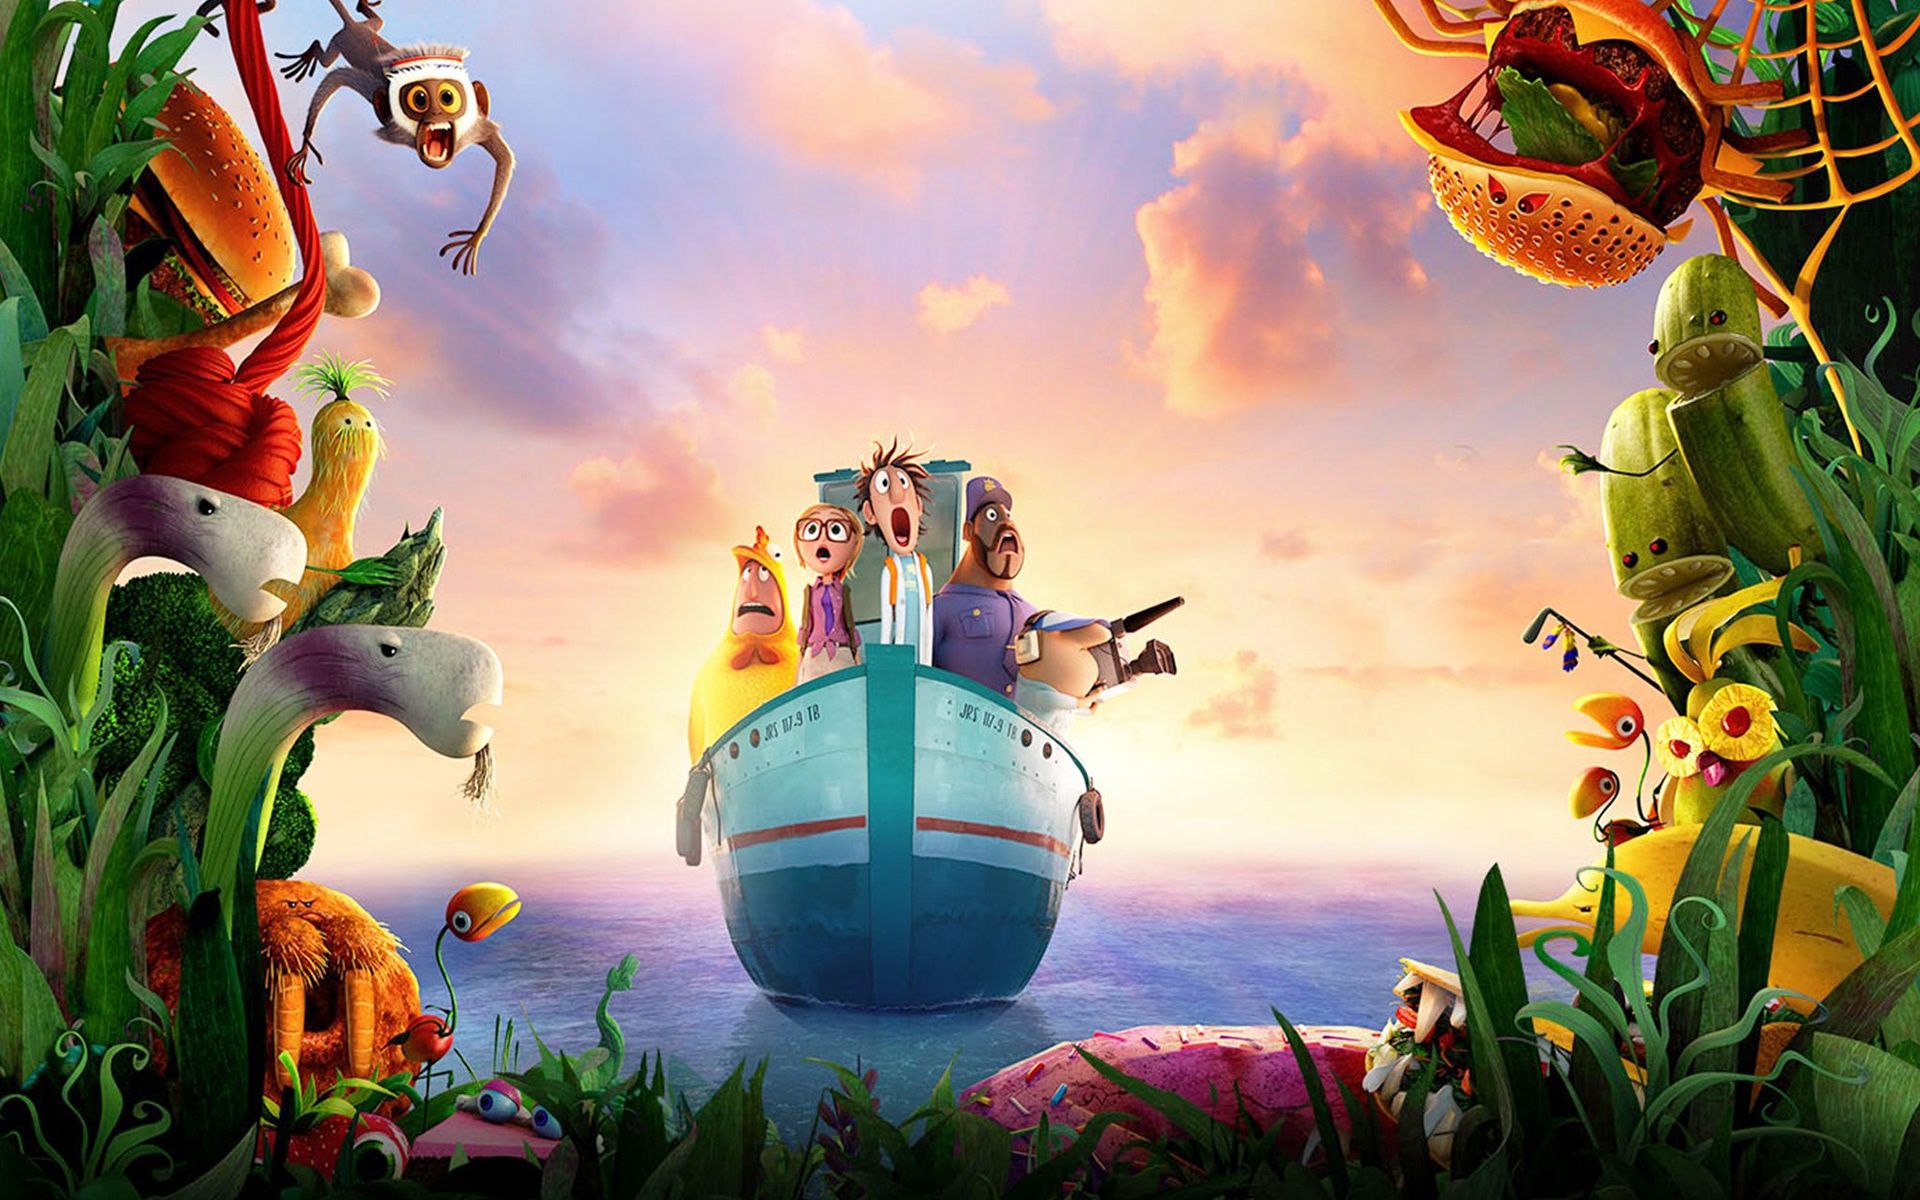 Cloudy With A Chance Of Meatballs 2 Bad Guy - wallpaper.